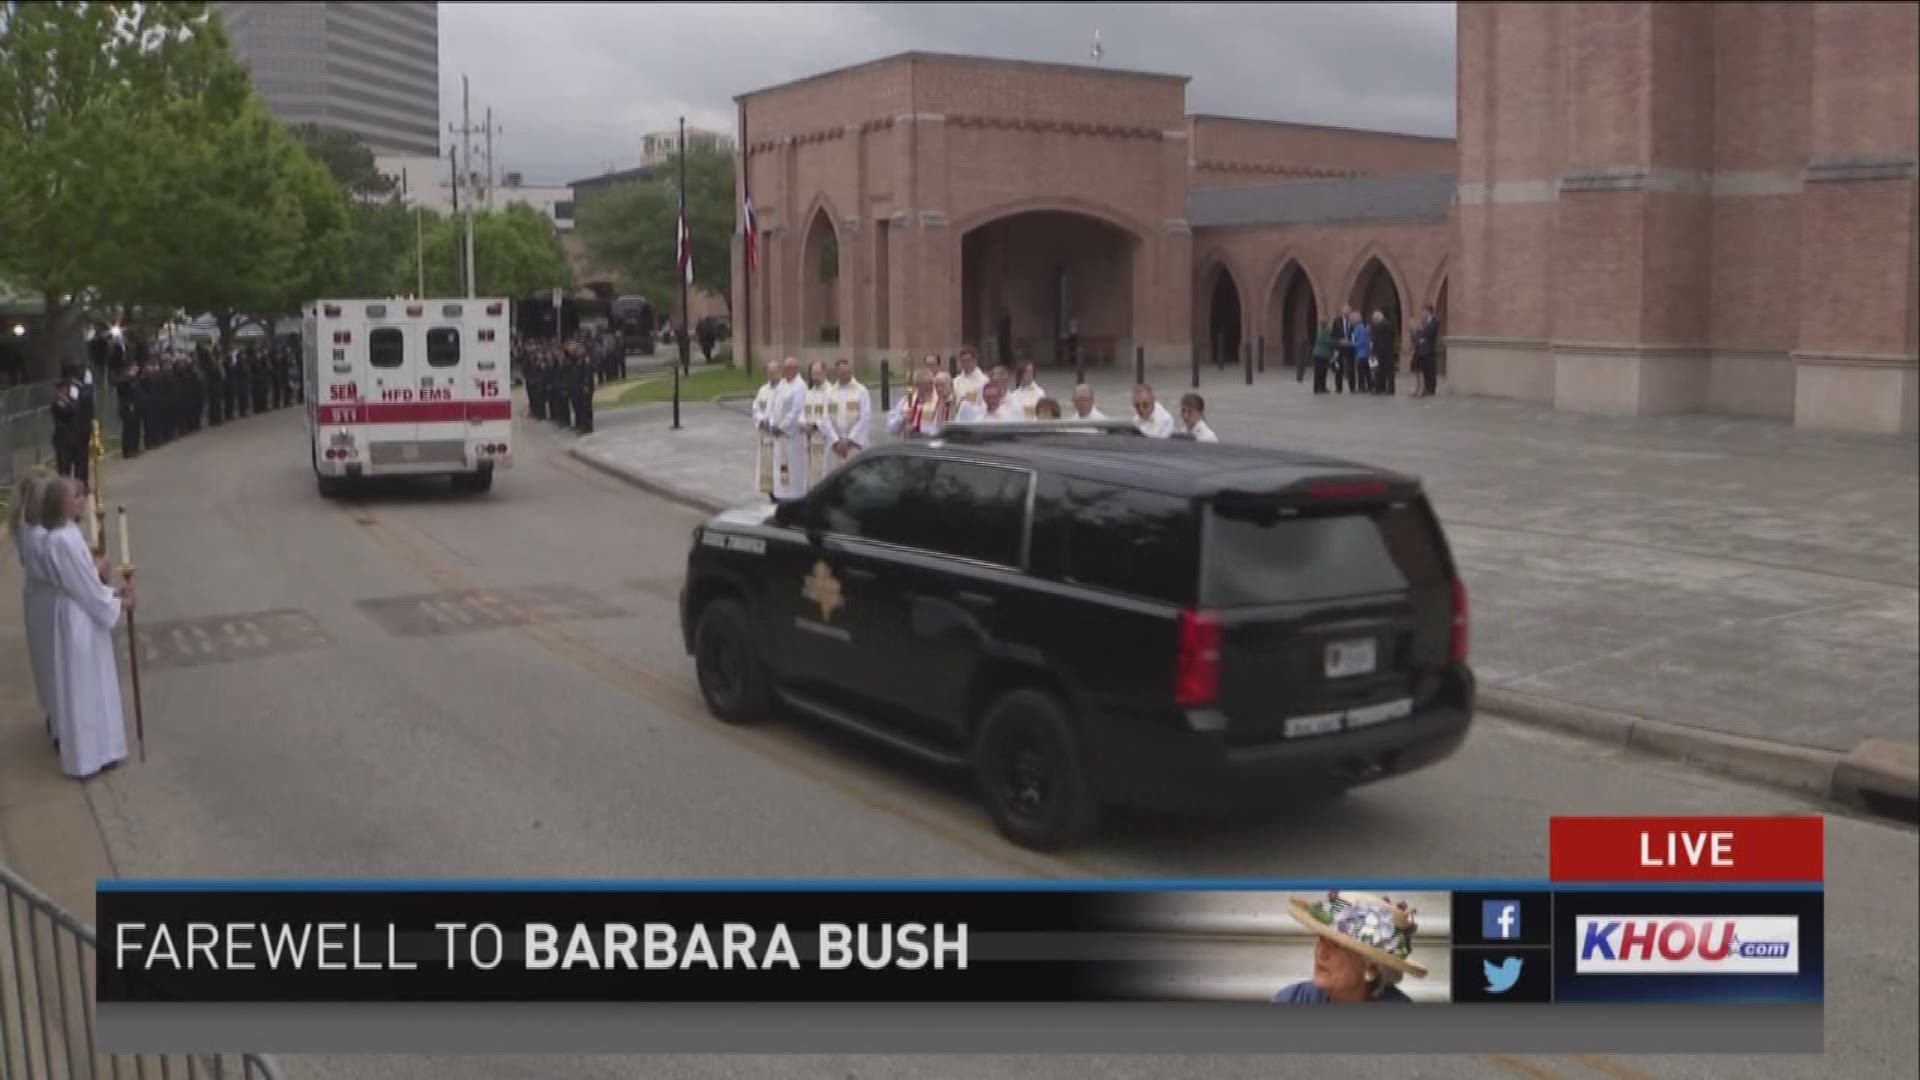 Watch KHOU's live coverage as the family motorcade leaves St. Martin's Church in Houston following the funeral service for former First Lady Barbara Bush. 